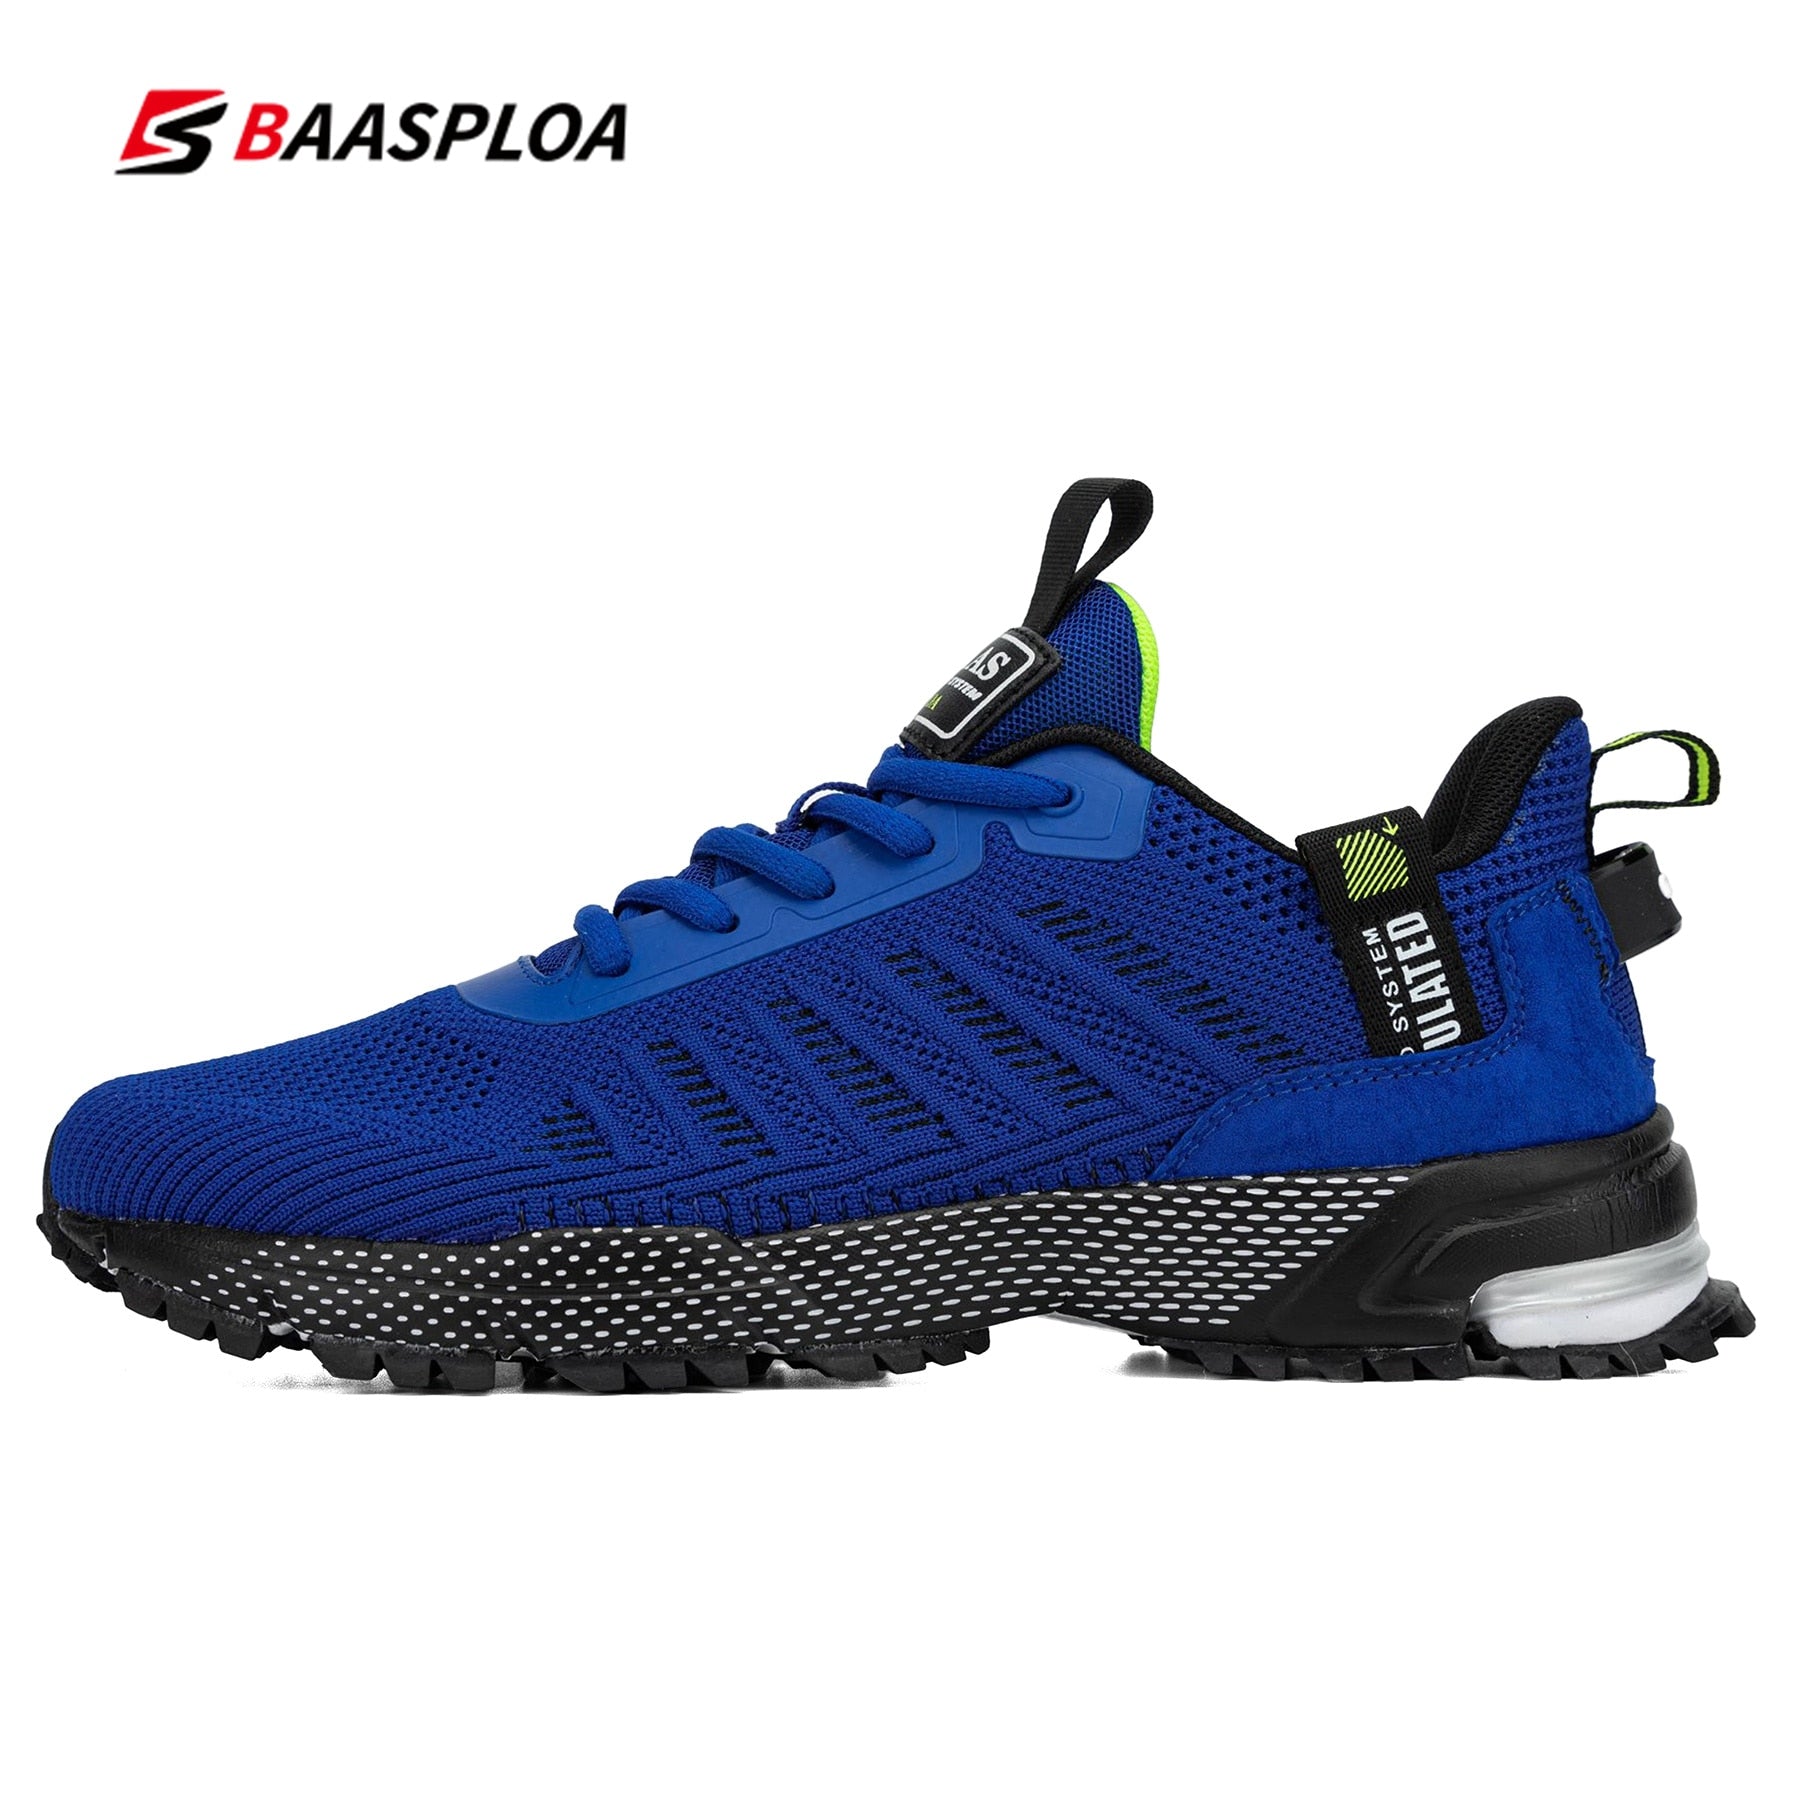 Professional Running Shoes For Men.